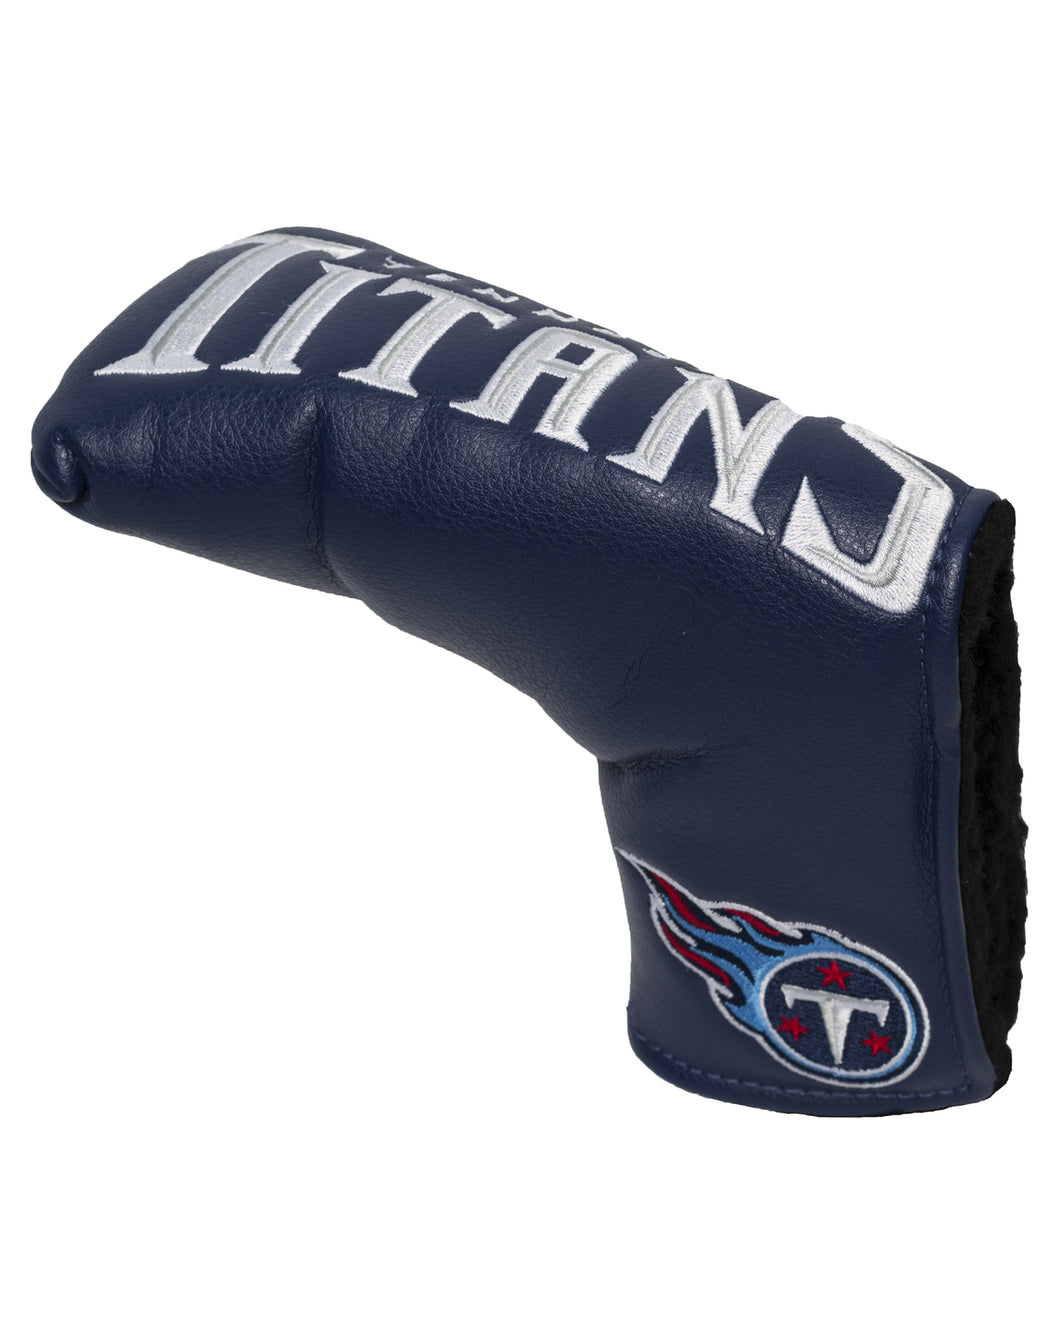 NFL Official Vintage Golf Blade Style Putter Headcover. Tennessee Titans